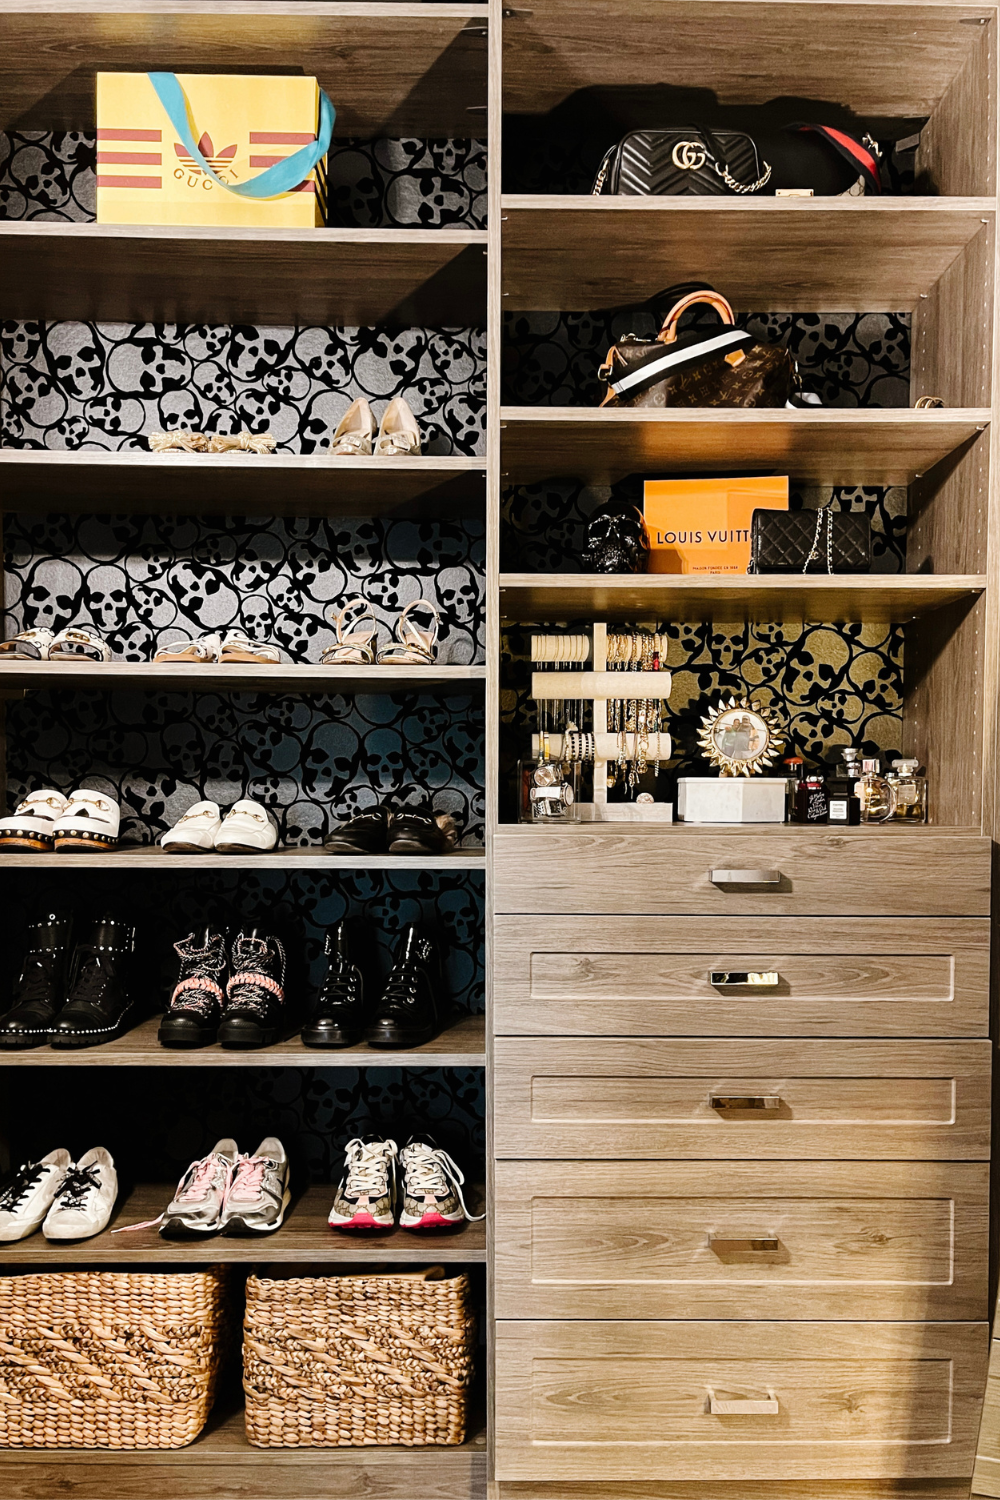 A view of Suzanne's closet storage, organization, and skull wallpaper